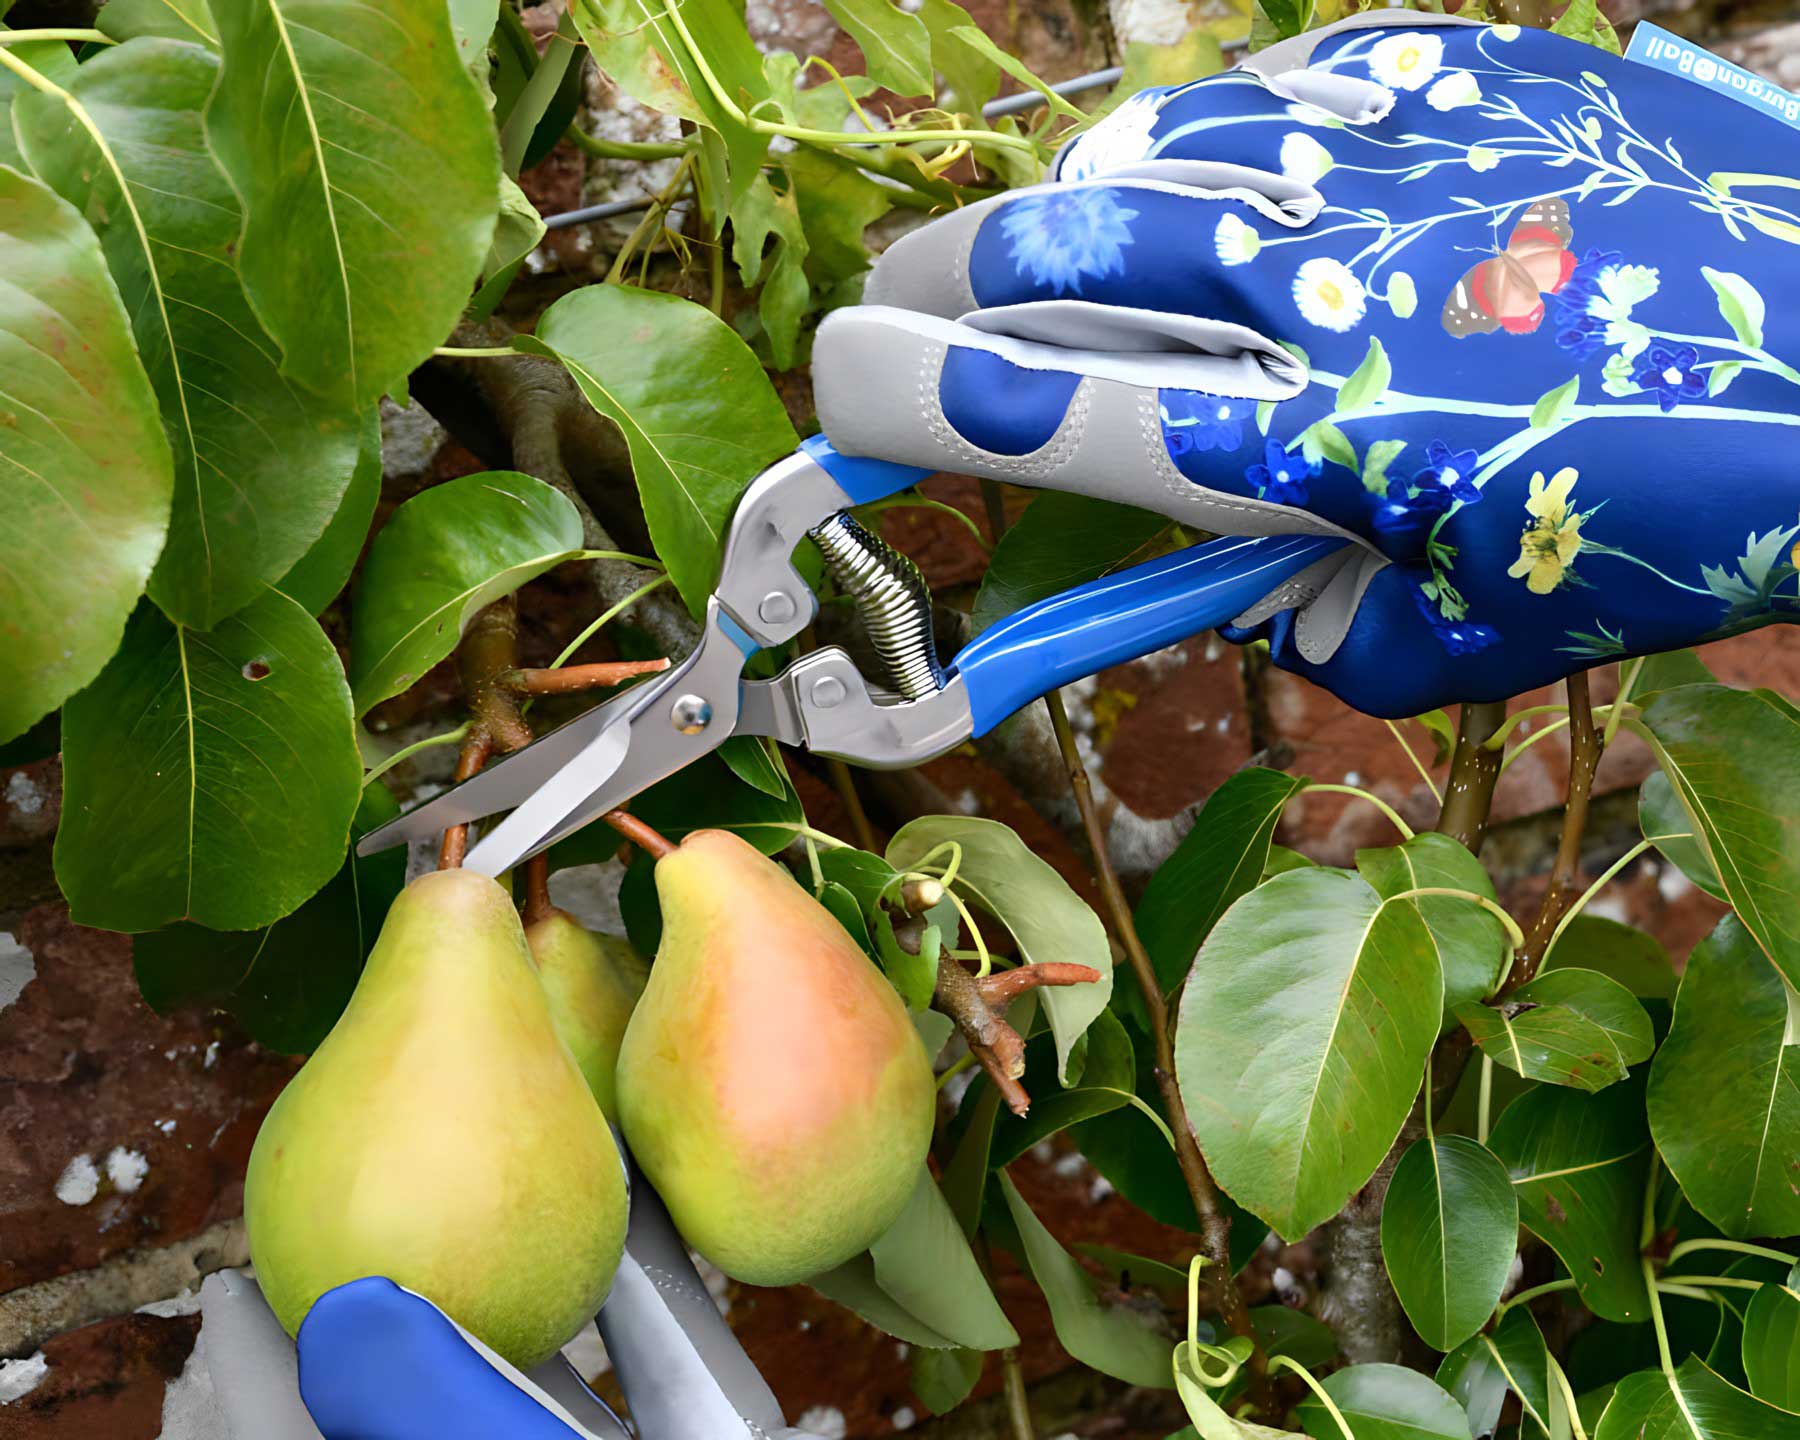 Garden Snips - part of the Burgon and Ball British Meadow range of garden tools and accessories